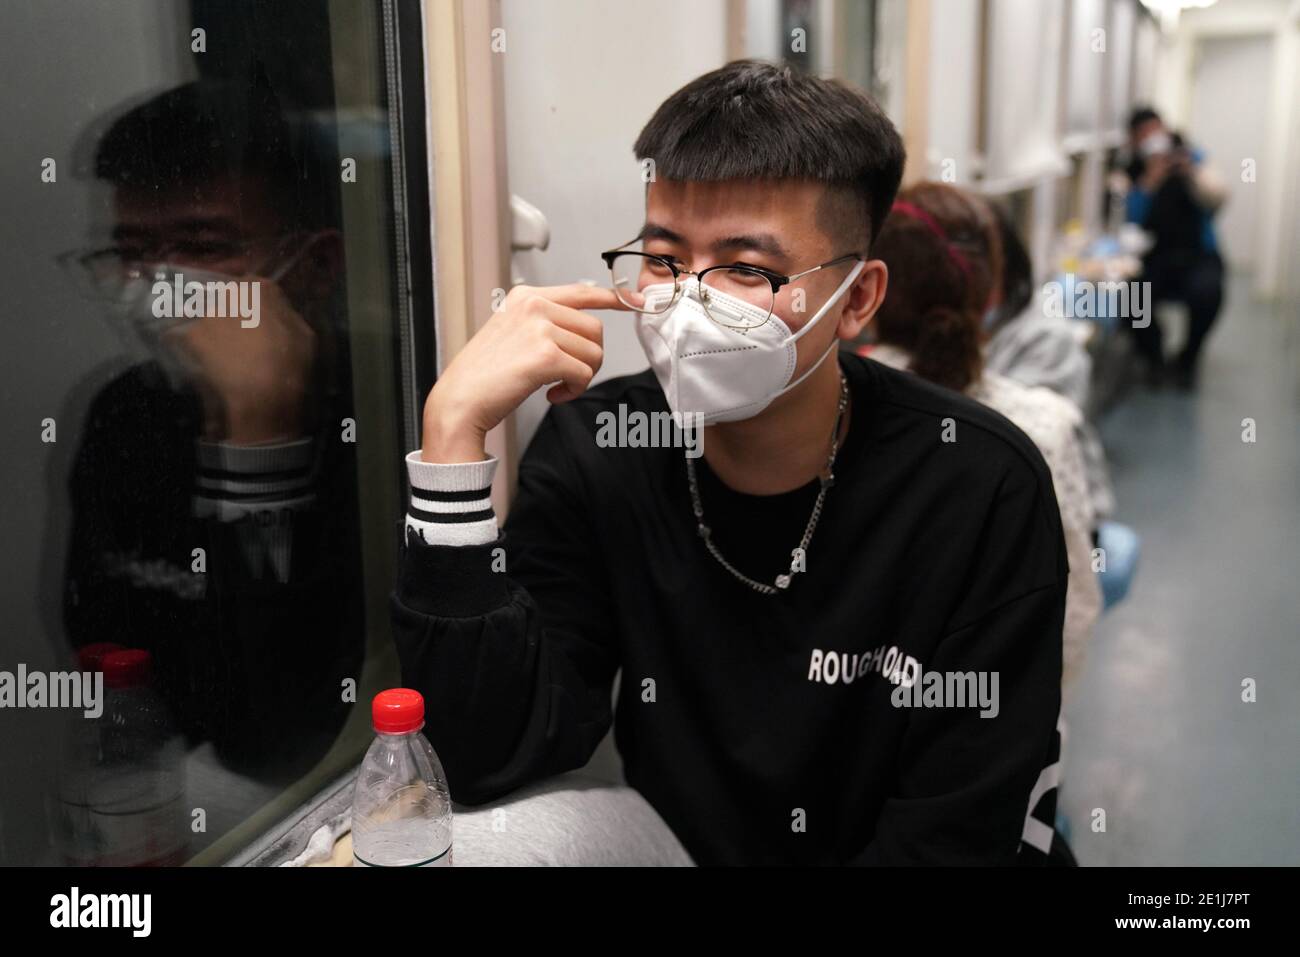 (210107) -- HARBIN, Jan. 7, 2021 (Xinhua) -- A passenger talks with his friend on train K7093 running from Harbin, northeast China's Heilongjiang Province to Hailar, north China's Inner Mongolia Autonomous Region, Jan. 6, 2021. Train No. K7093/4, connecting Harbin and Hailar, runs a distance of 1,320 kilometers and stops at 52 stations during the about 26-hour trip. The train stops every 30 minutes on average due to so many stops and is known as the slowest train in the forest area between the two destinations. Having operated for over 30 years, the train's facilities have witnessed upgrade an Stock Photo